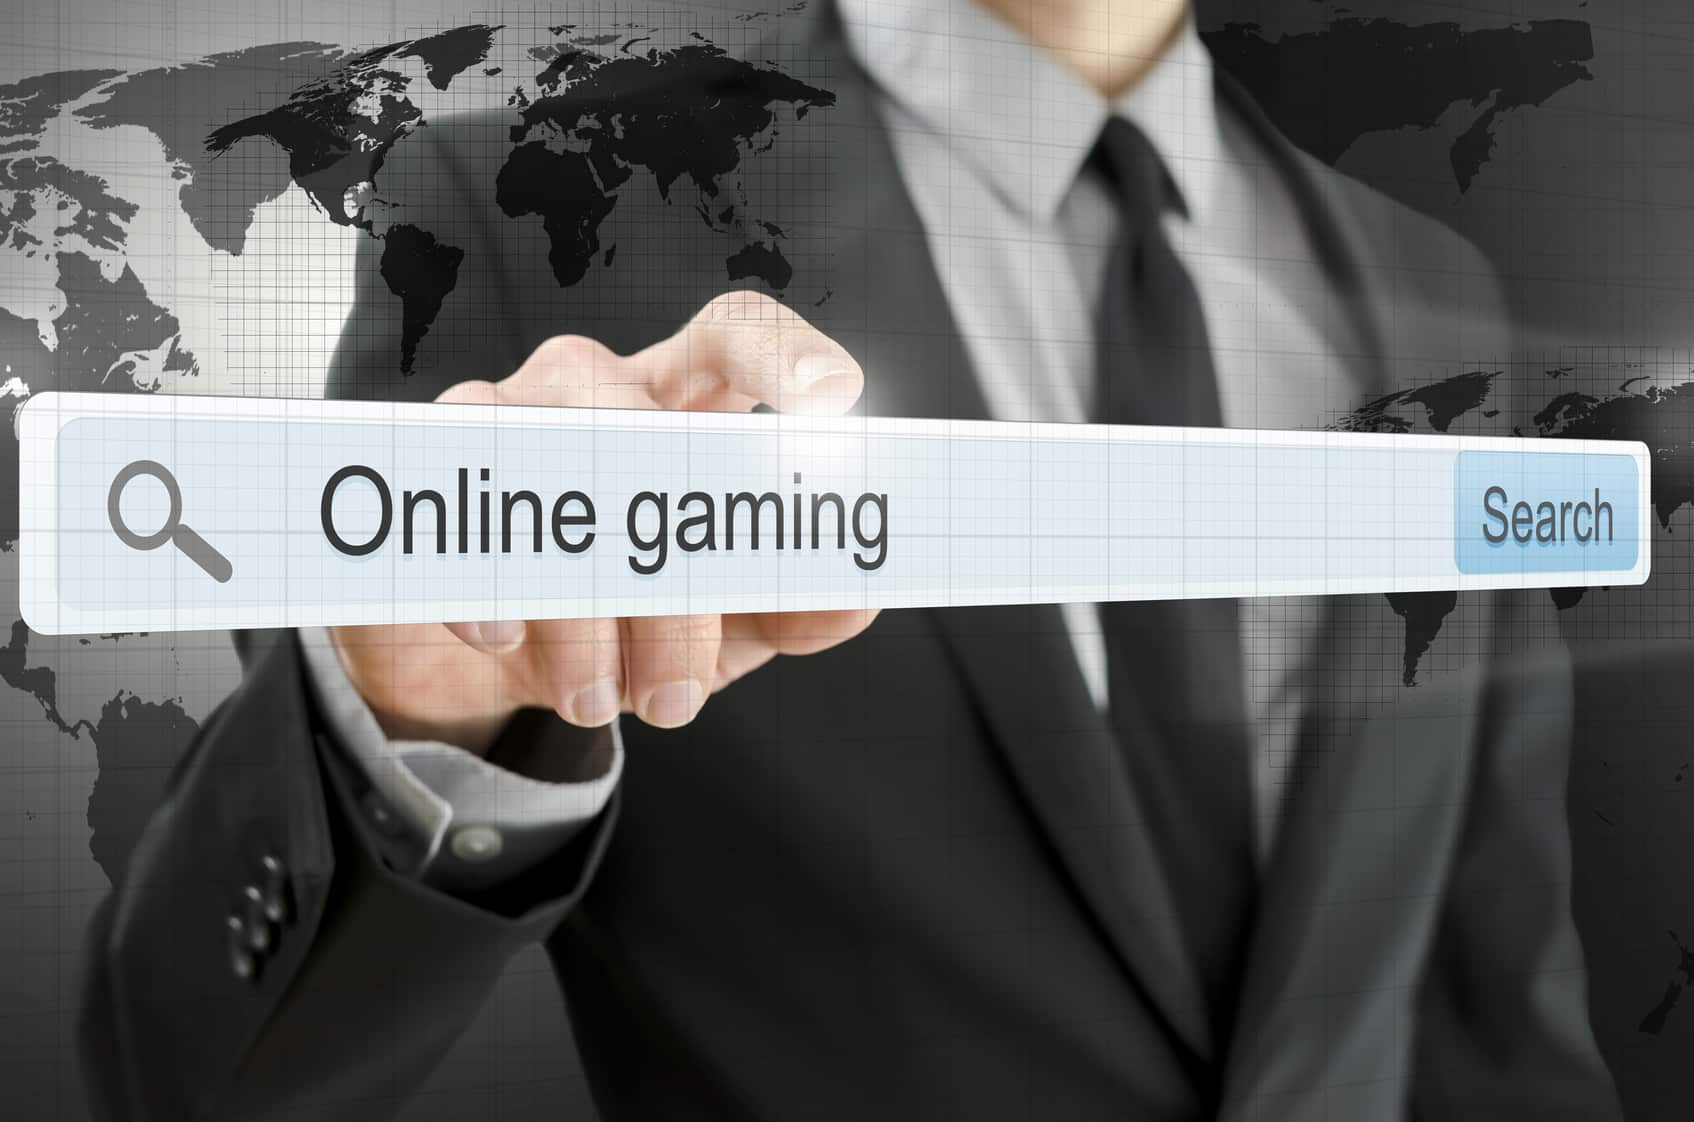 Online games as a tool for ESL teaching